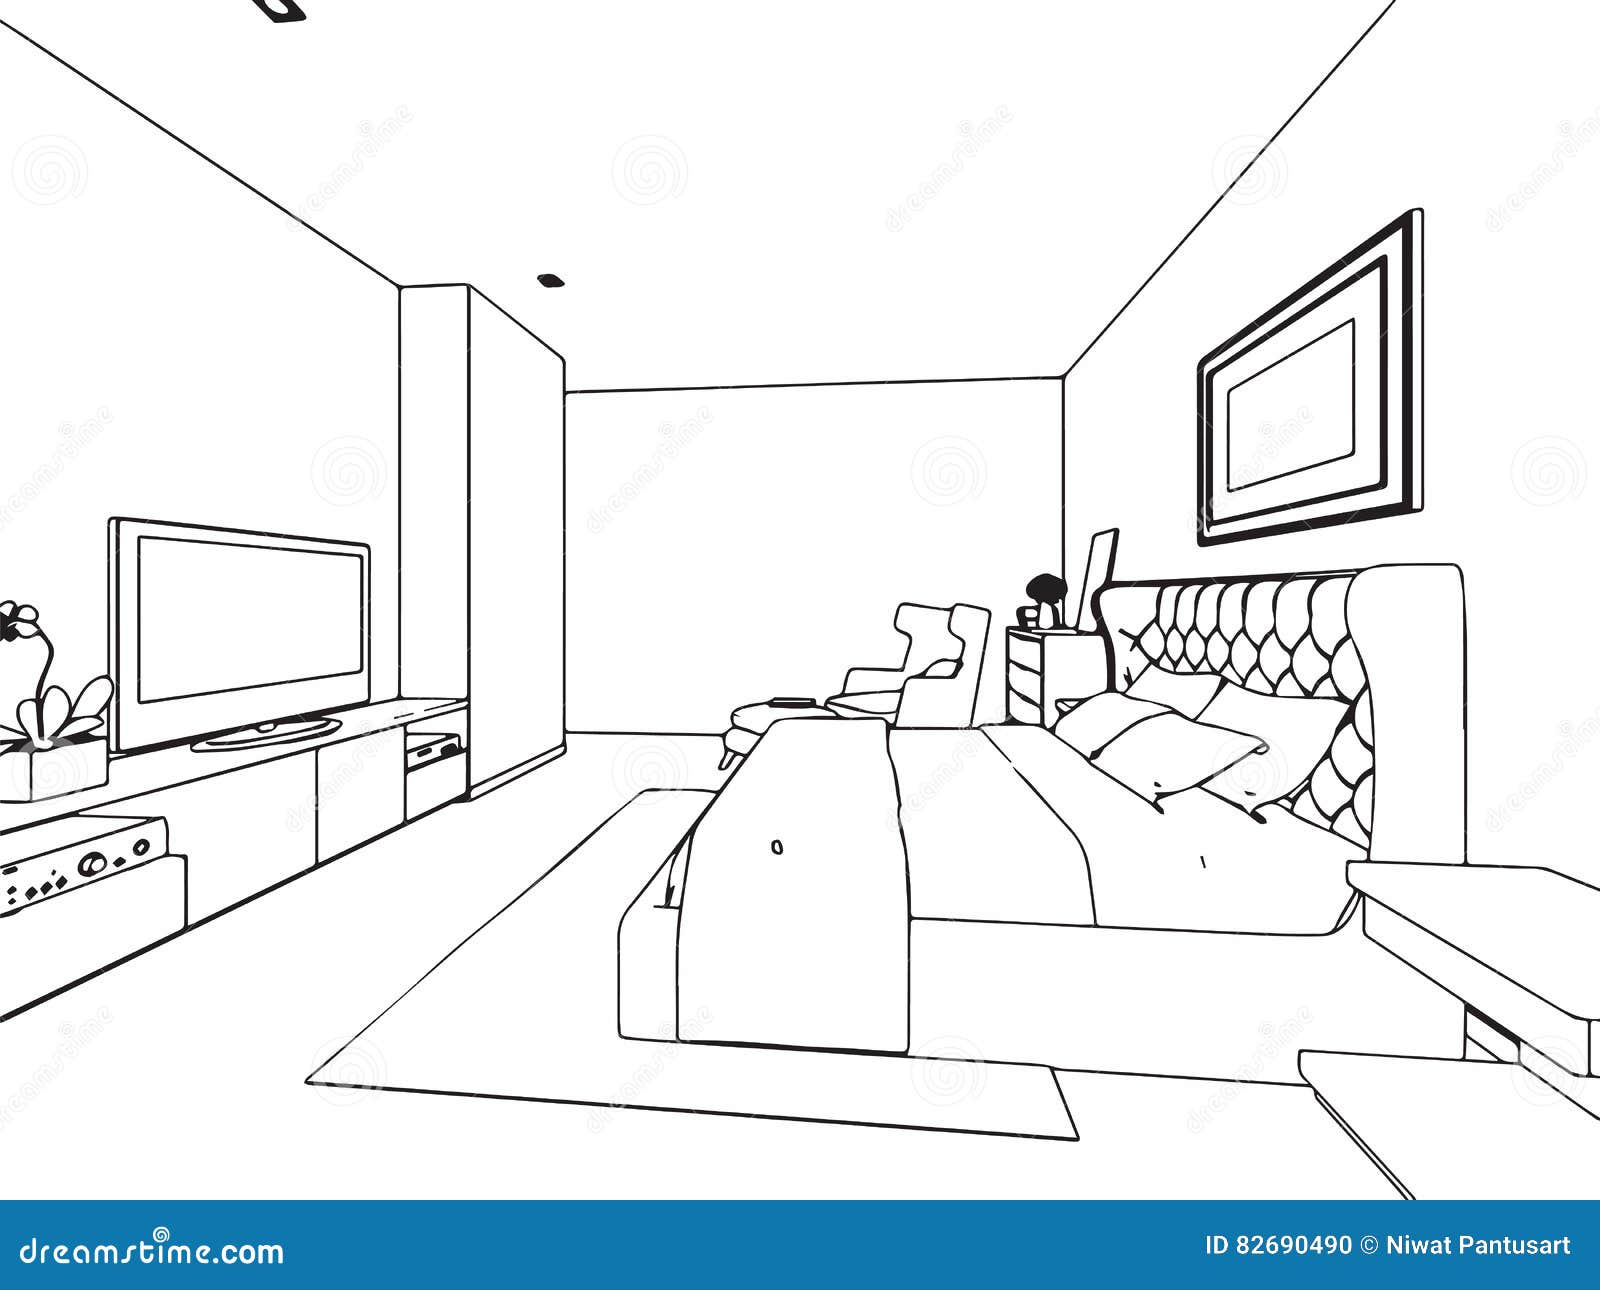 Outline Sketch Drawing Interior Perspective Of House Stock